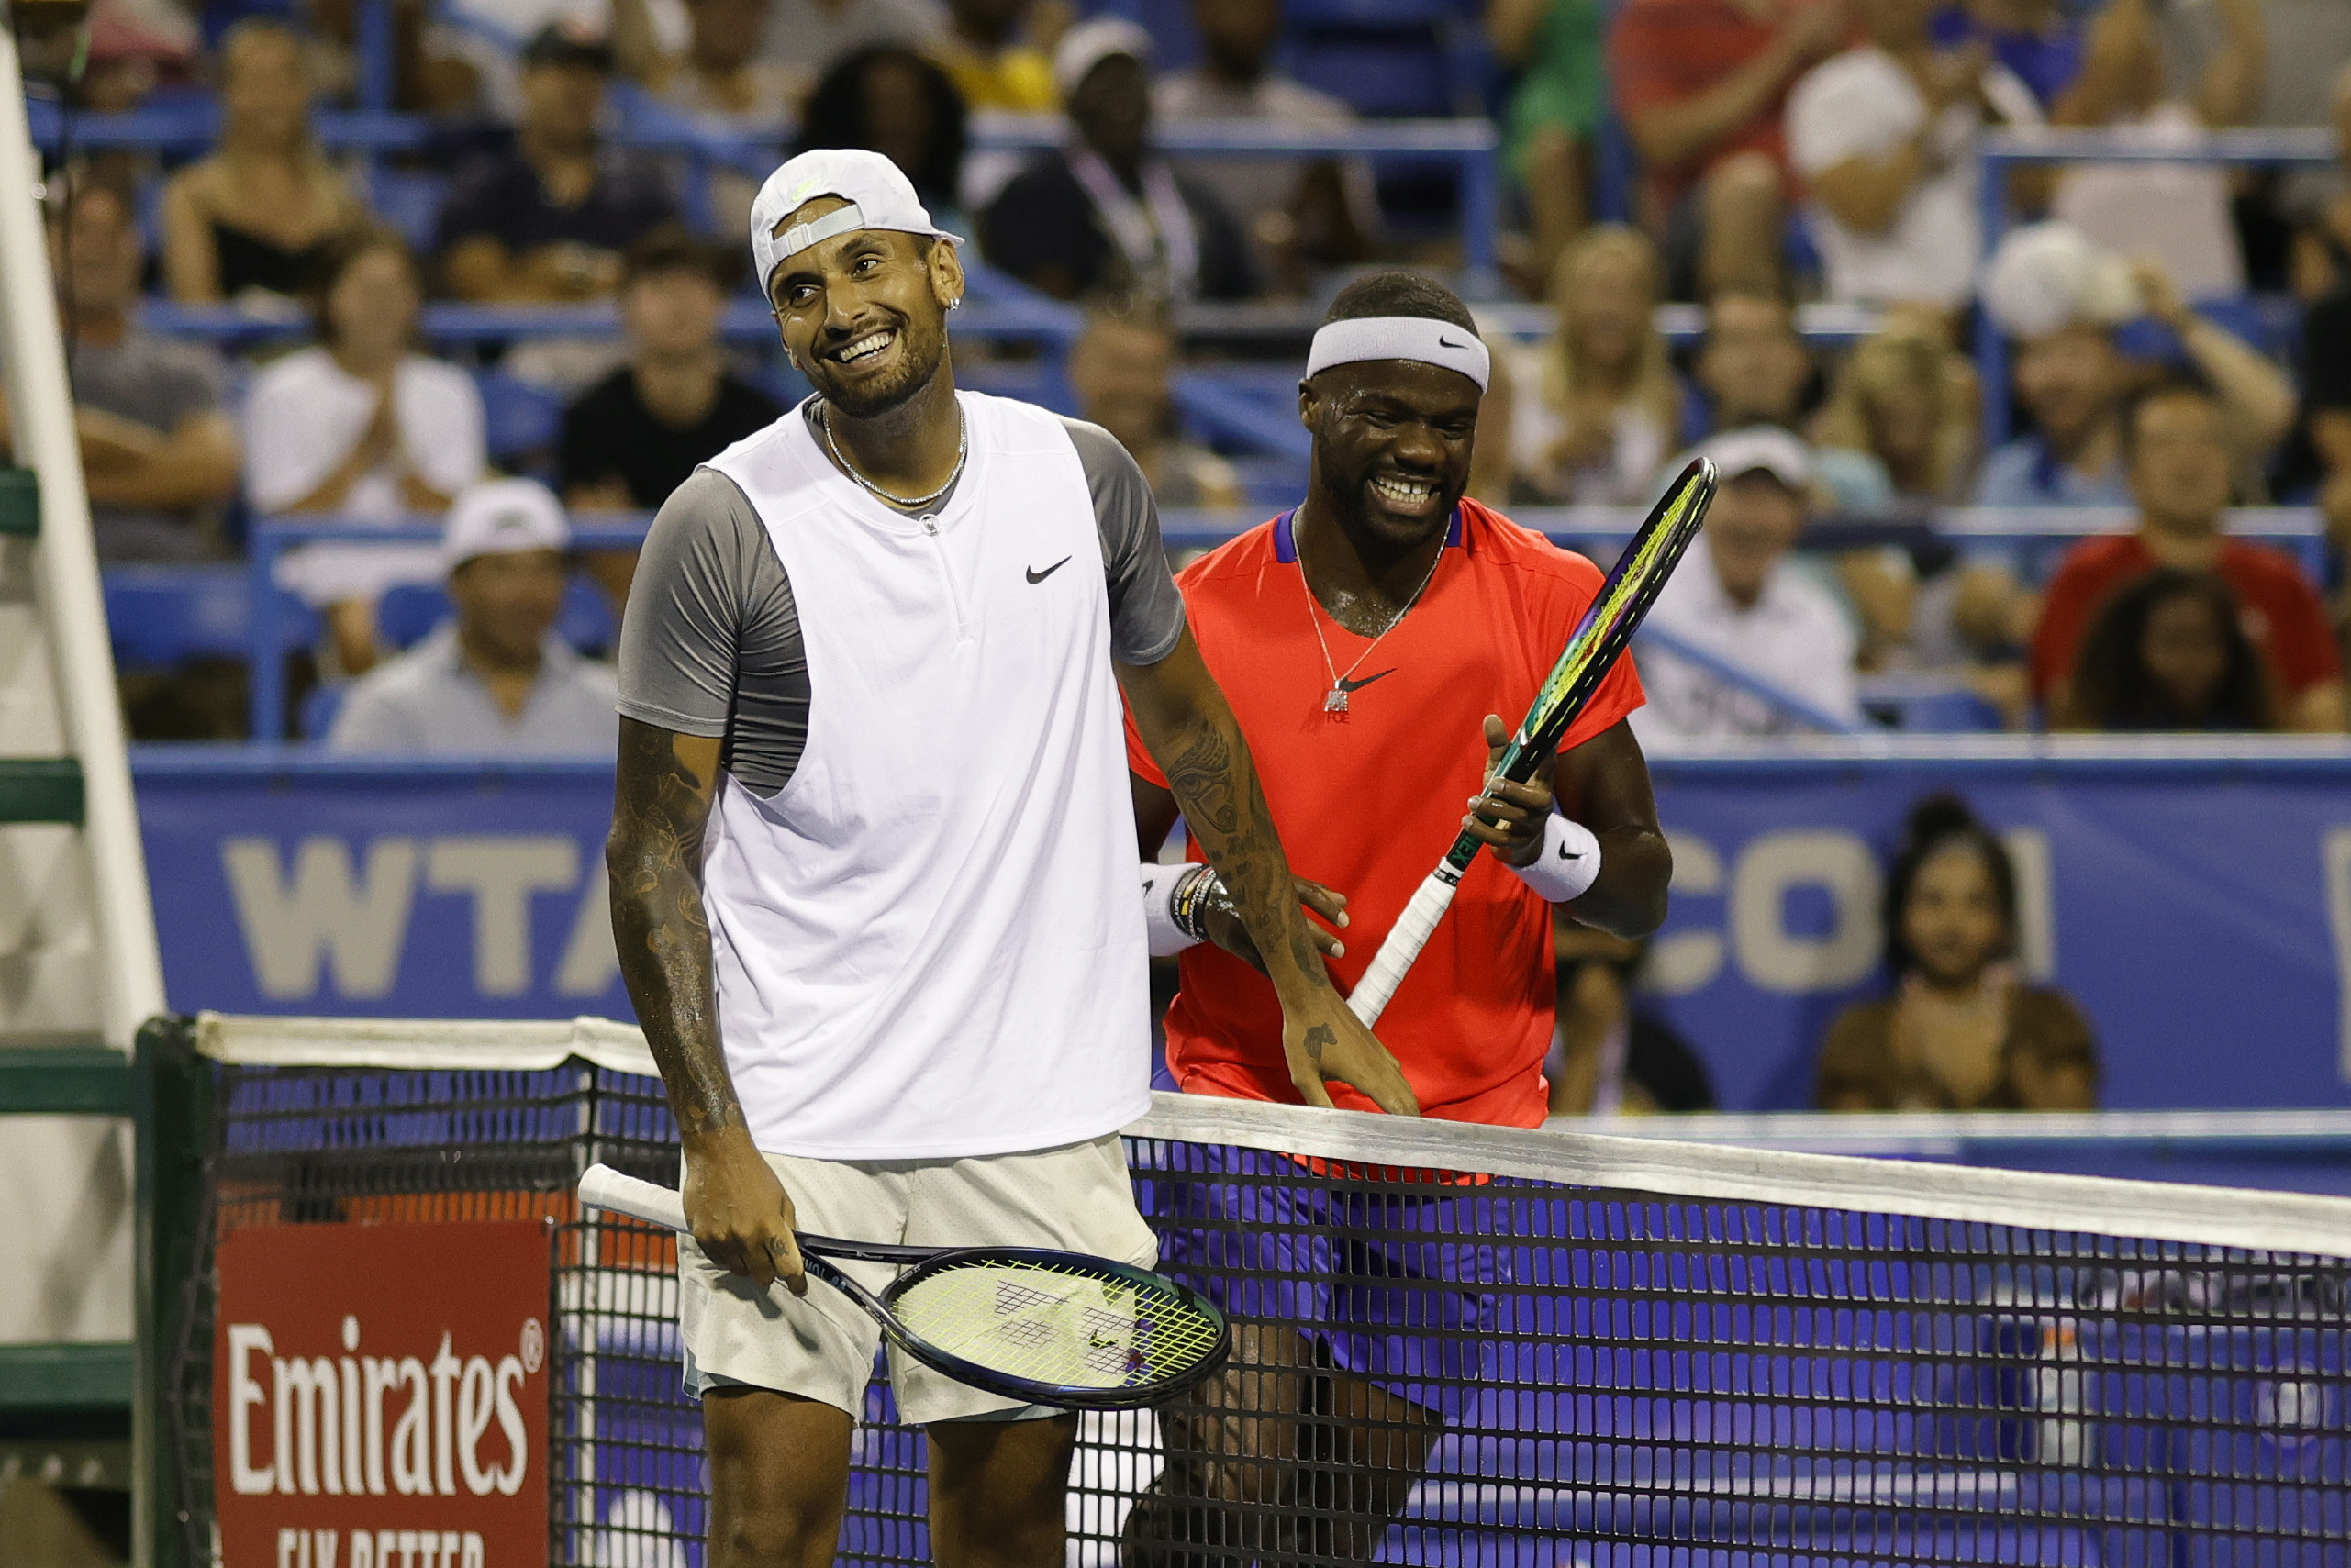 Citi Open 2022: Nick Kyrgios saves five match points to tame Frances Tiafoe to reach semis in Washington